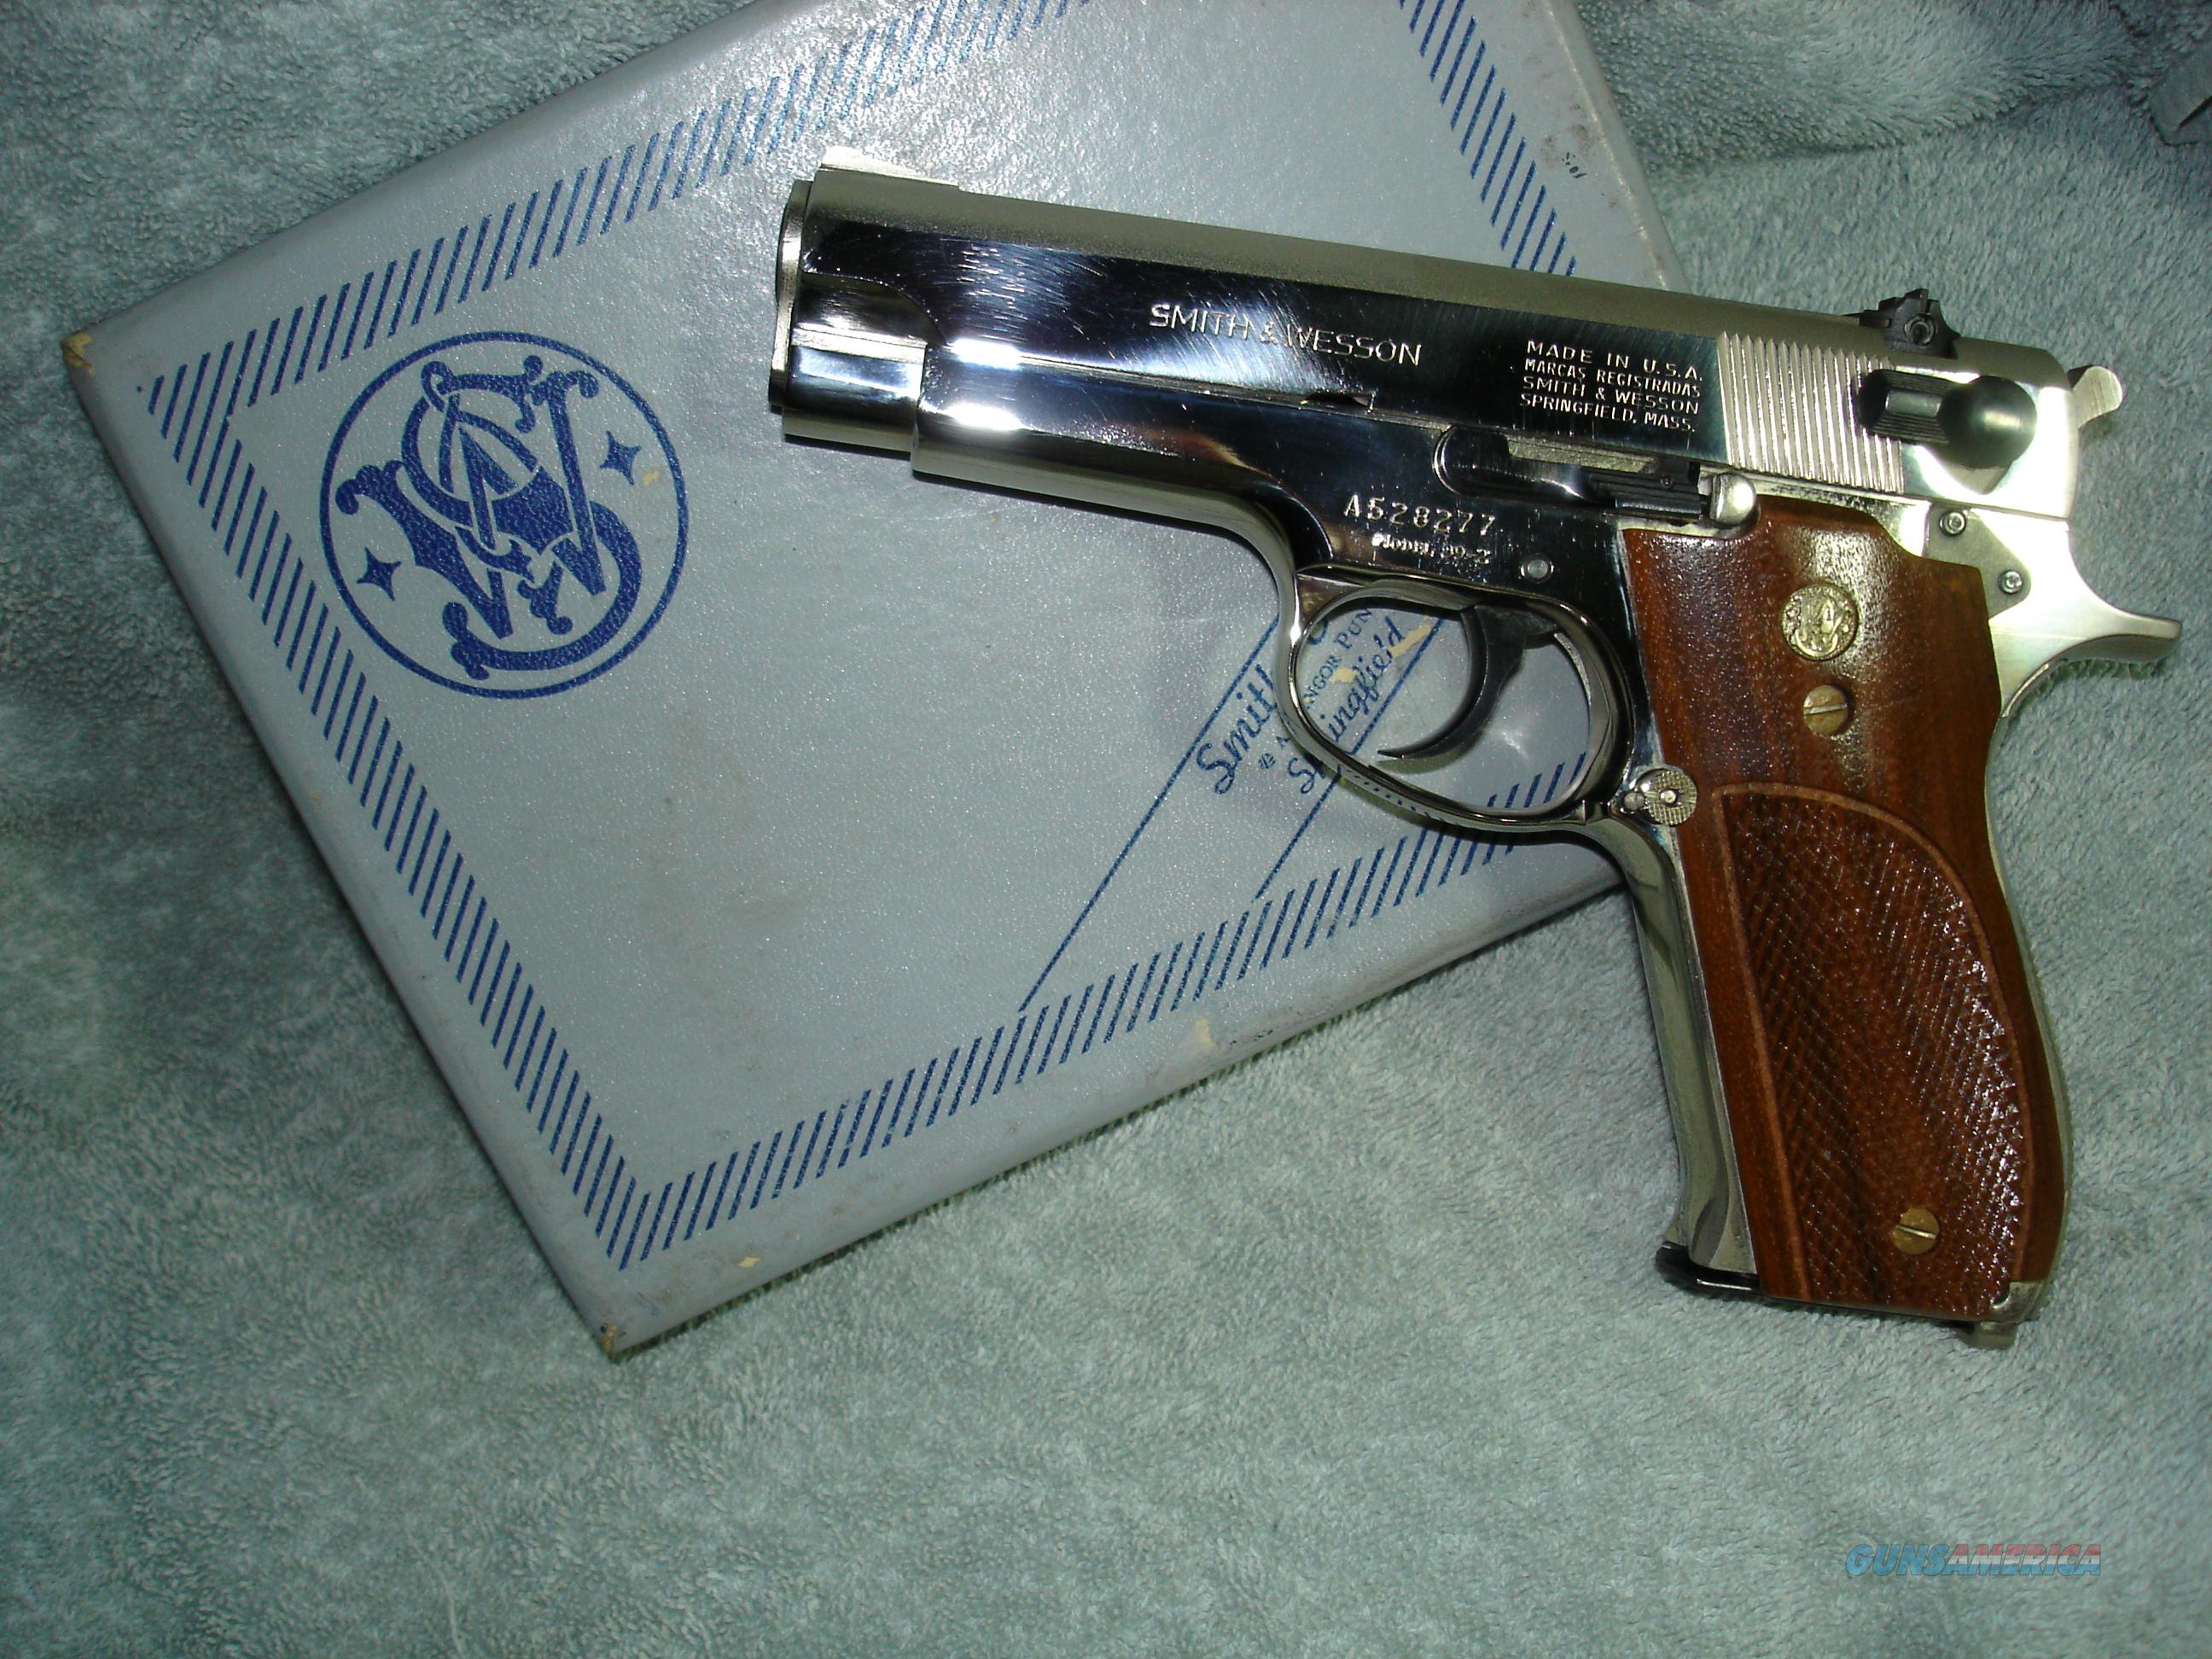 2592x1944 > Smith & Wesson Pistol Wallpapers